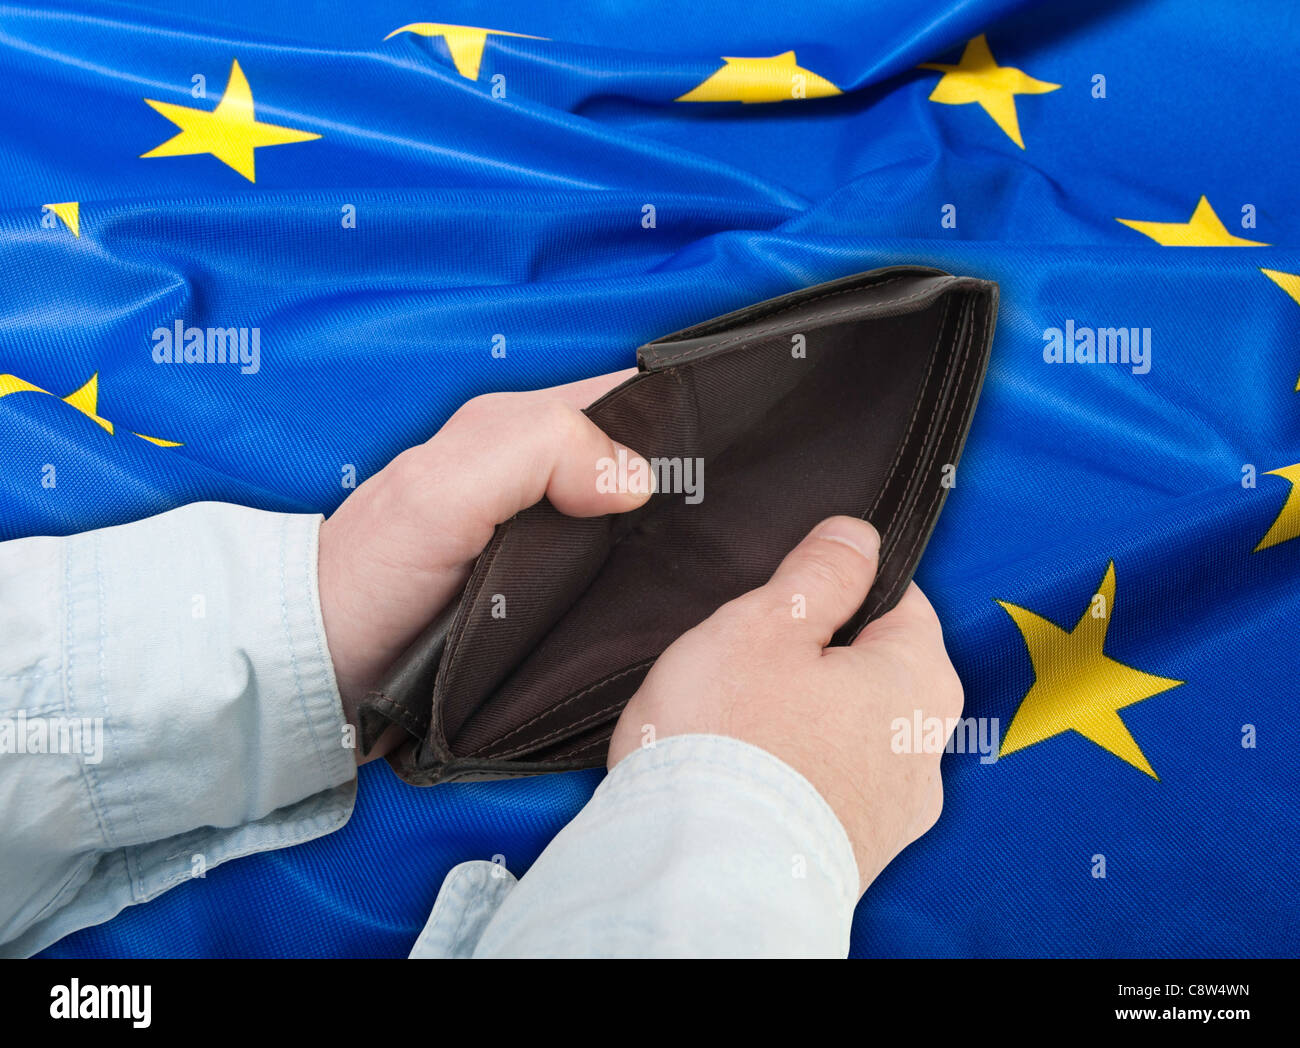 Financial Crisis in EU - Man's Hand With Empty Wallet and Flag of European Union Stock Photo